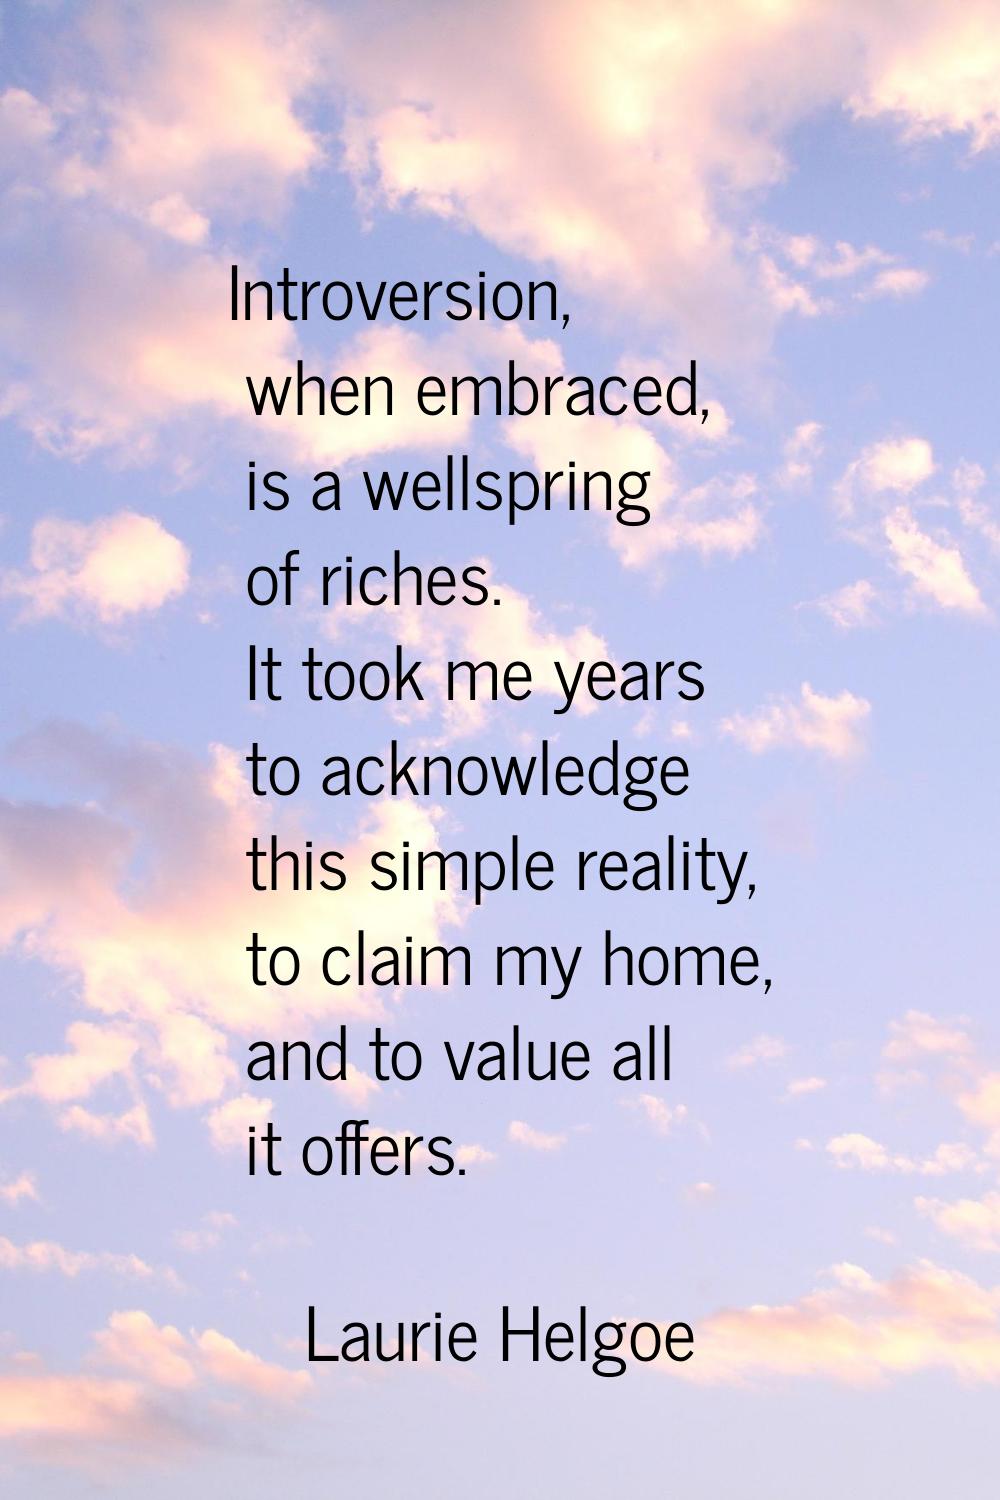 Introversion, when embraced, is a wellspring of riches. It took me years to acknowledge this simple